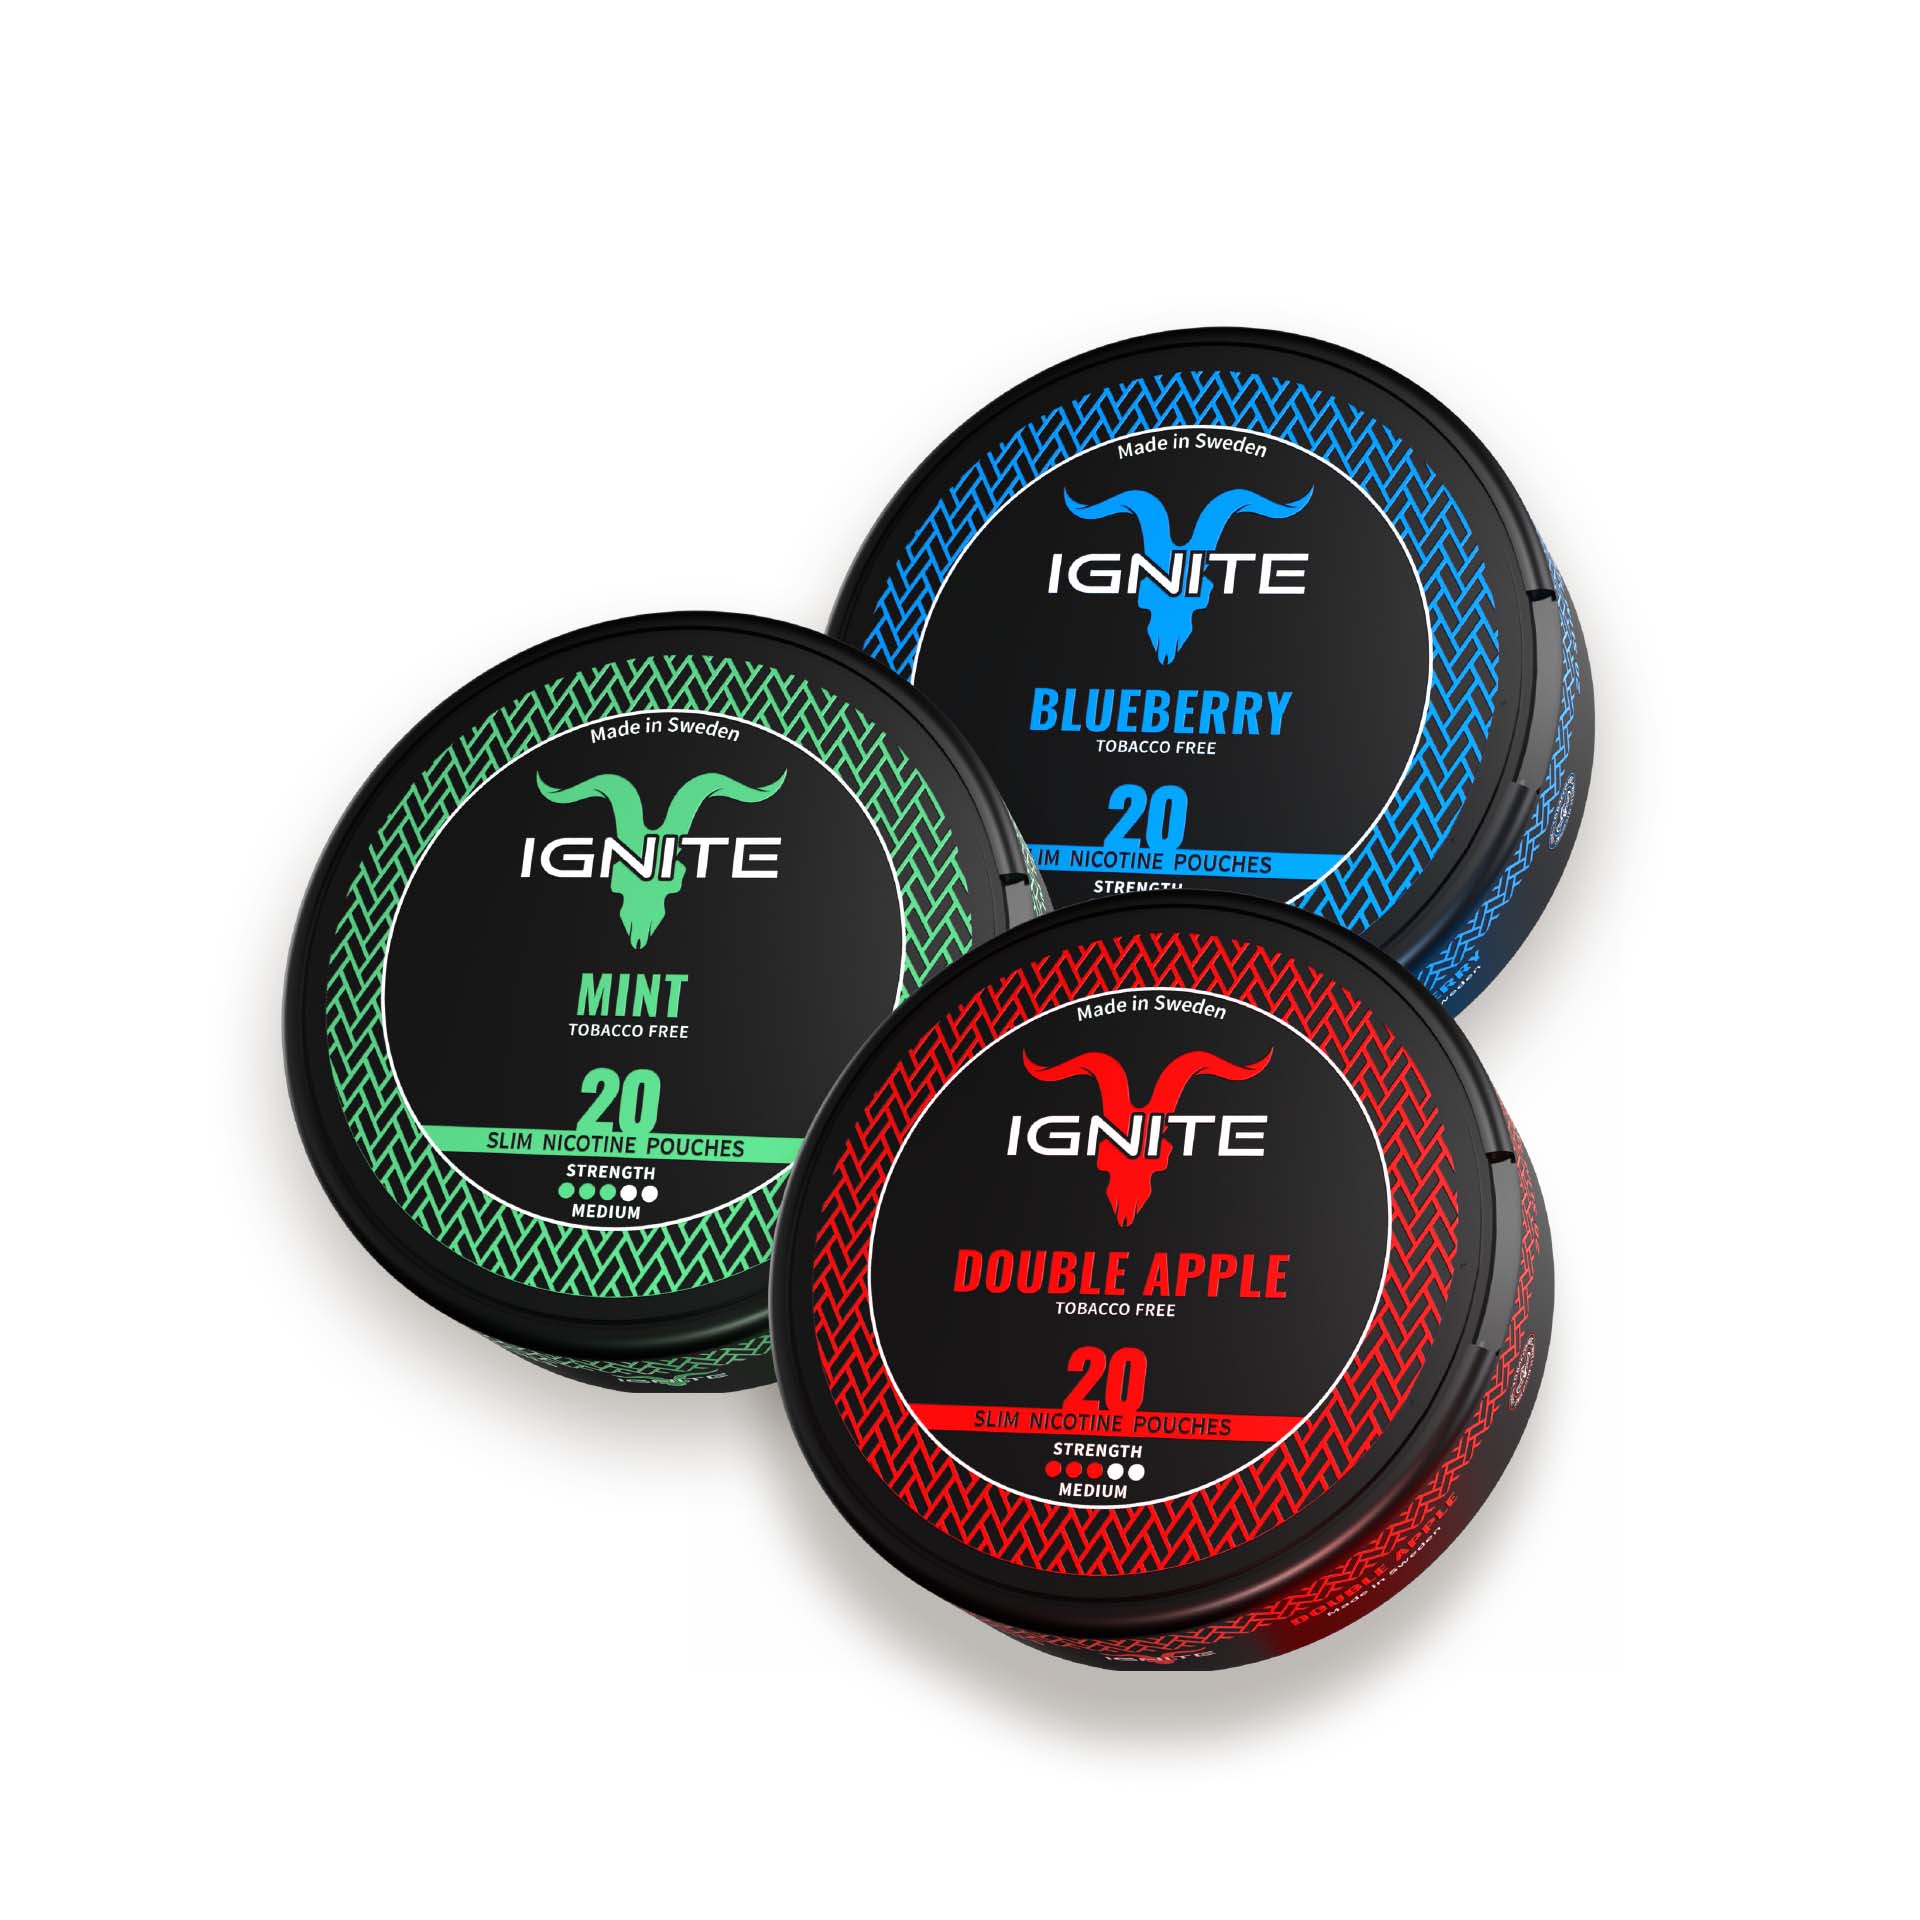 NEW - Nicotine pouches - 30 pack All Flavors Bundle - Ignite Pouches